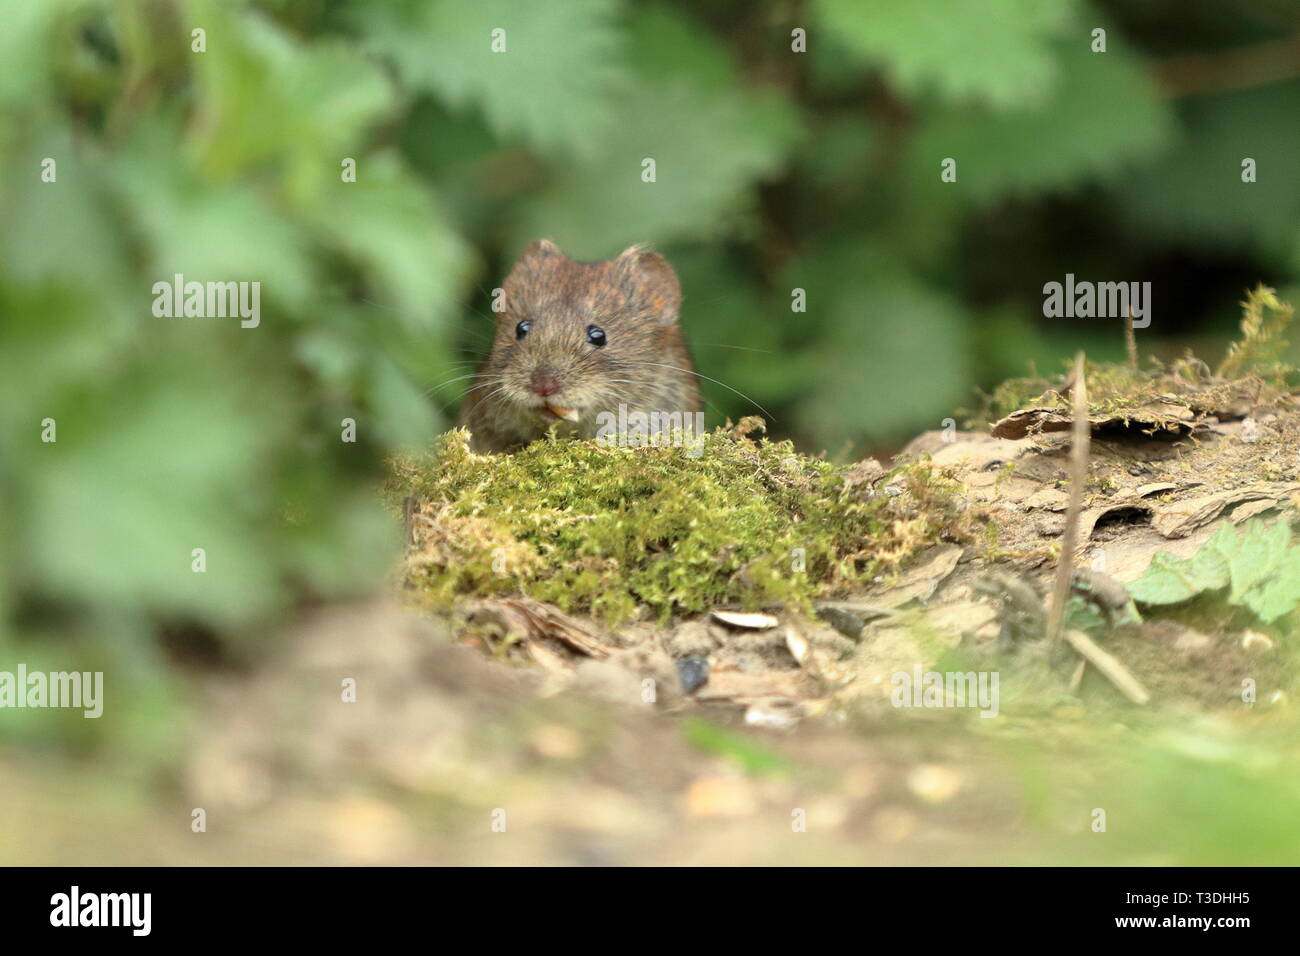 Bank vole (Myodes glareolus) with a seed in its mouth Stock Photo